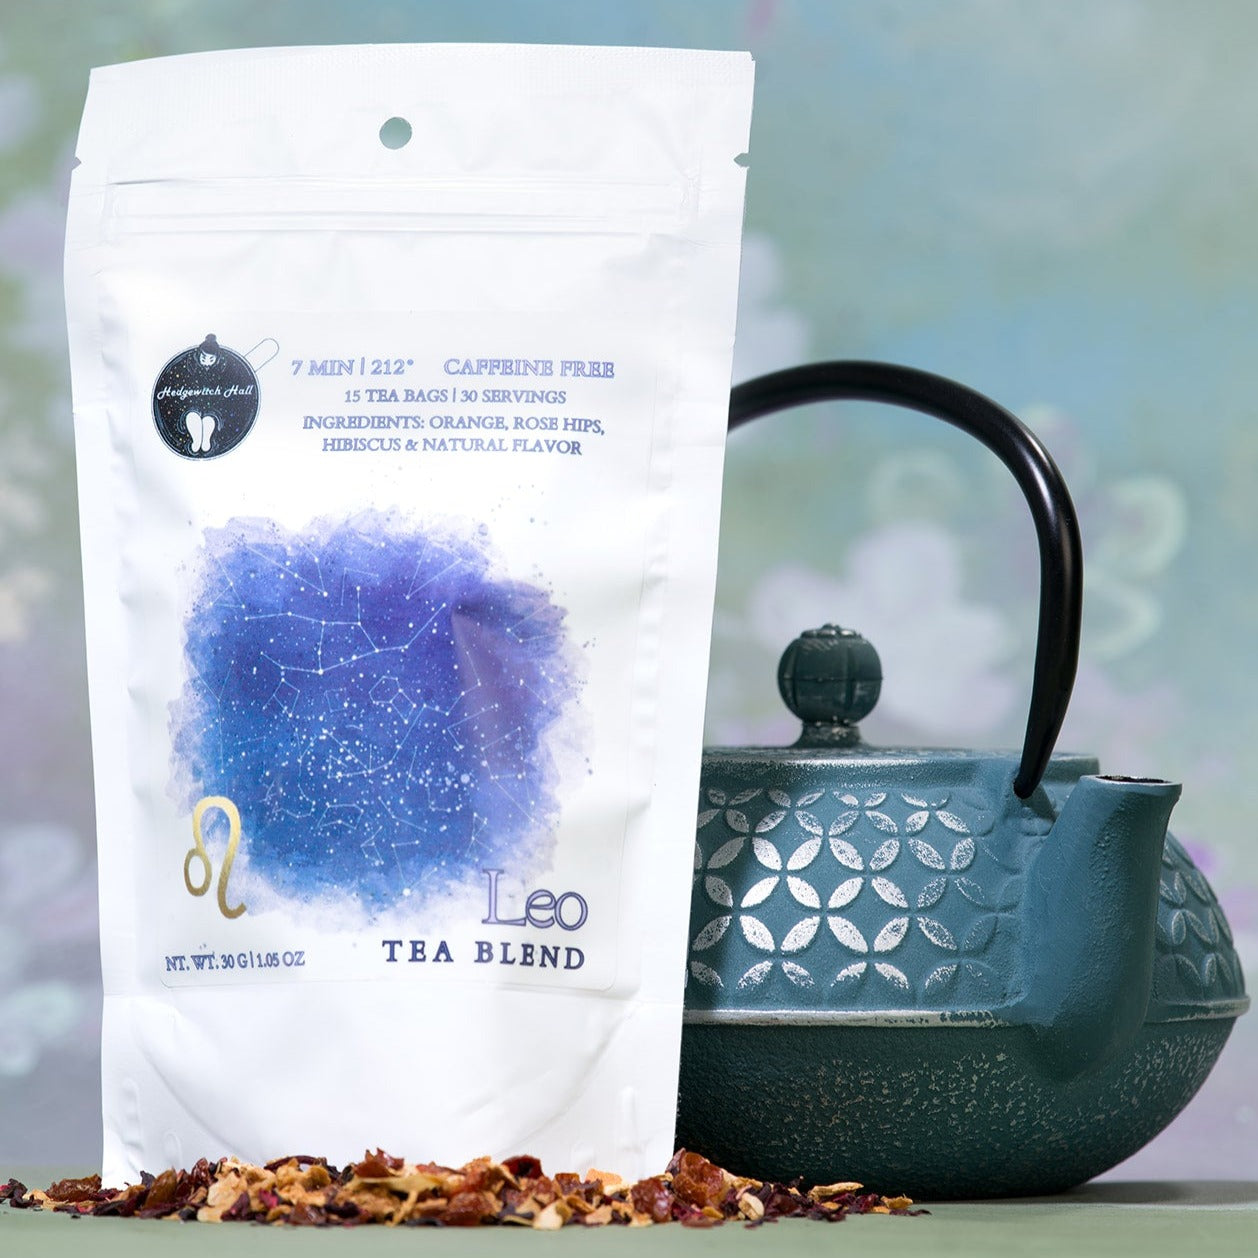 Product photo of Leo tea blend and teal teapot.